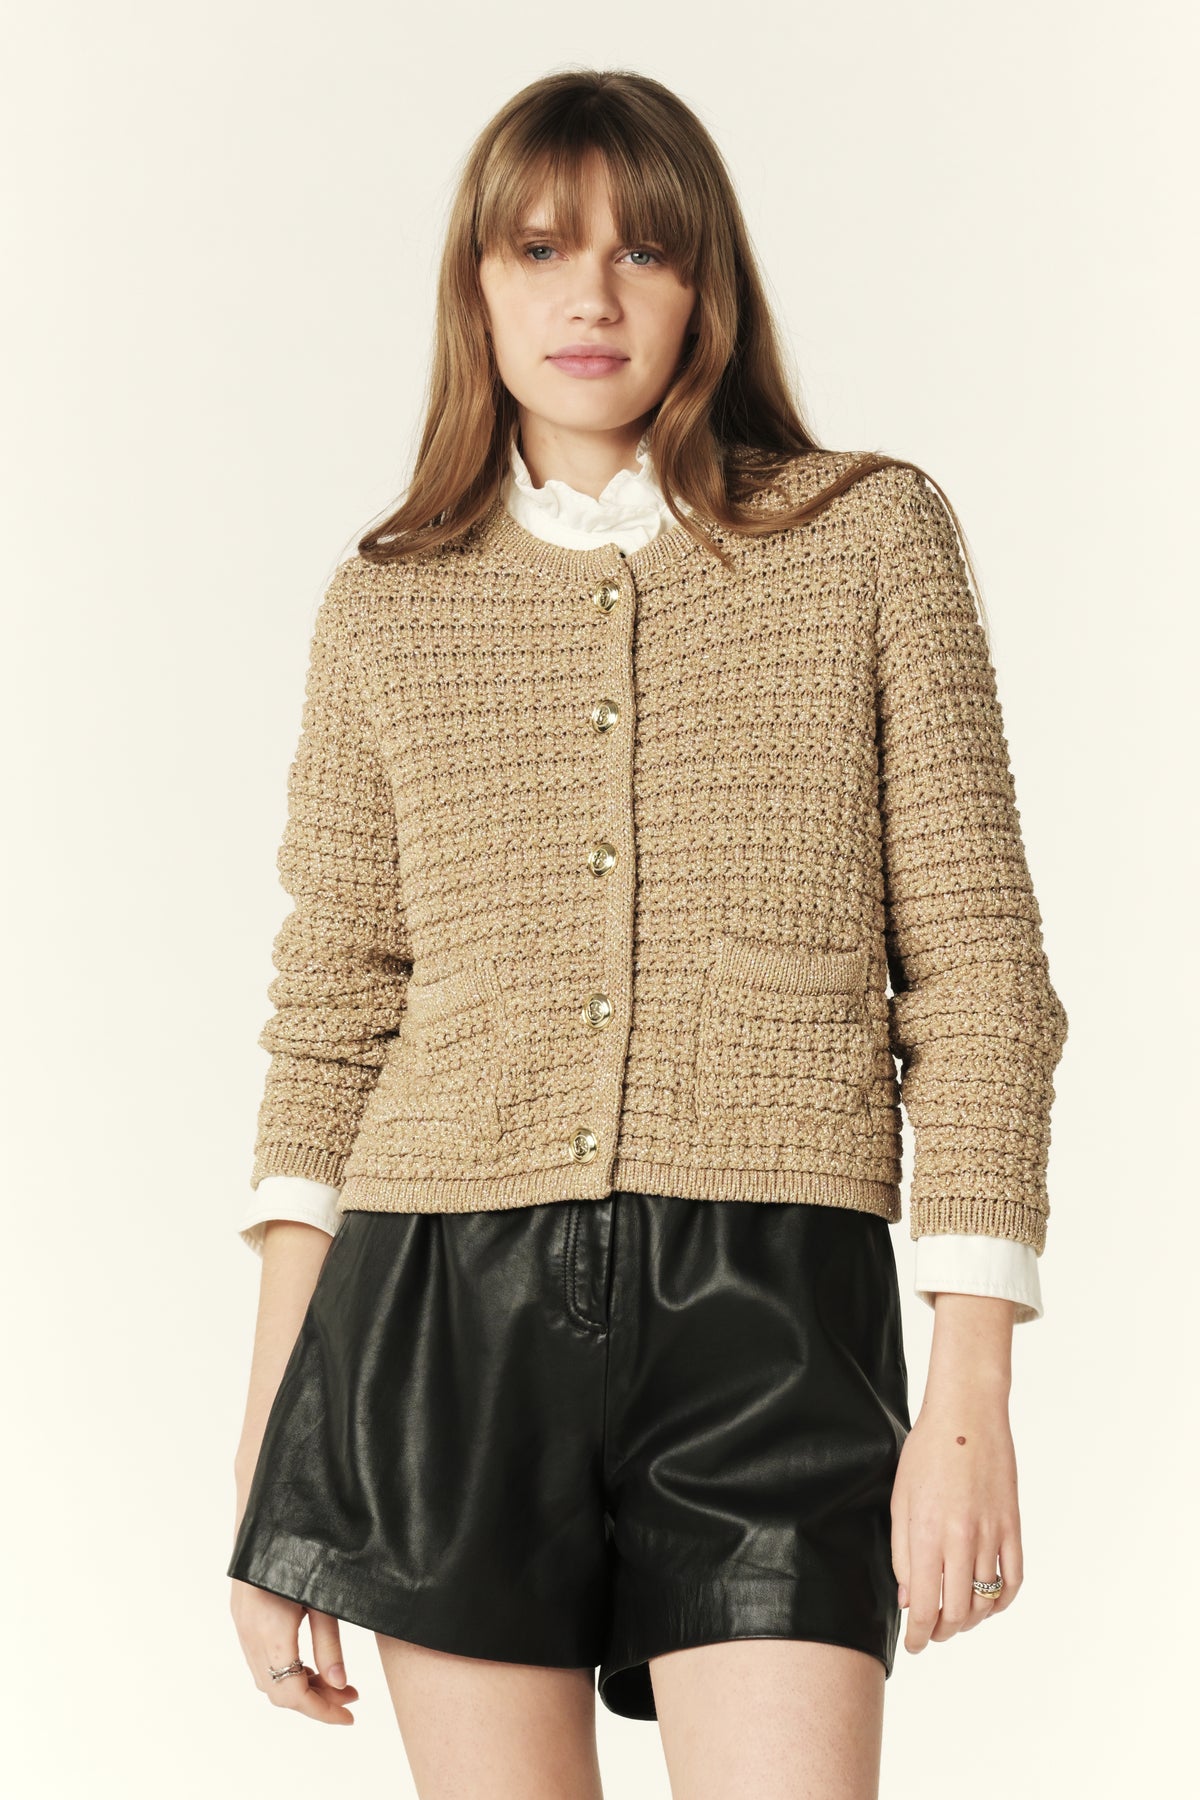 Crewneck gold metallic cardigan with two front patch pockets and gold button fastening